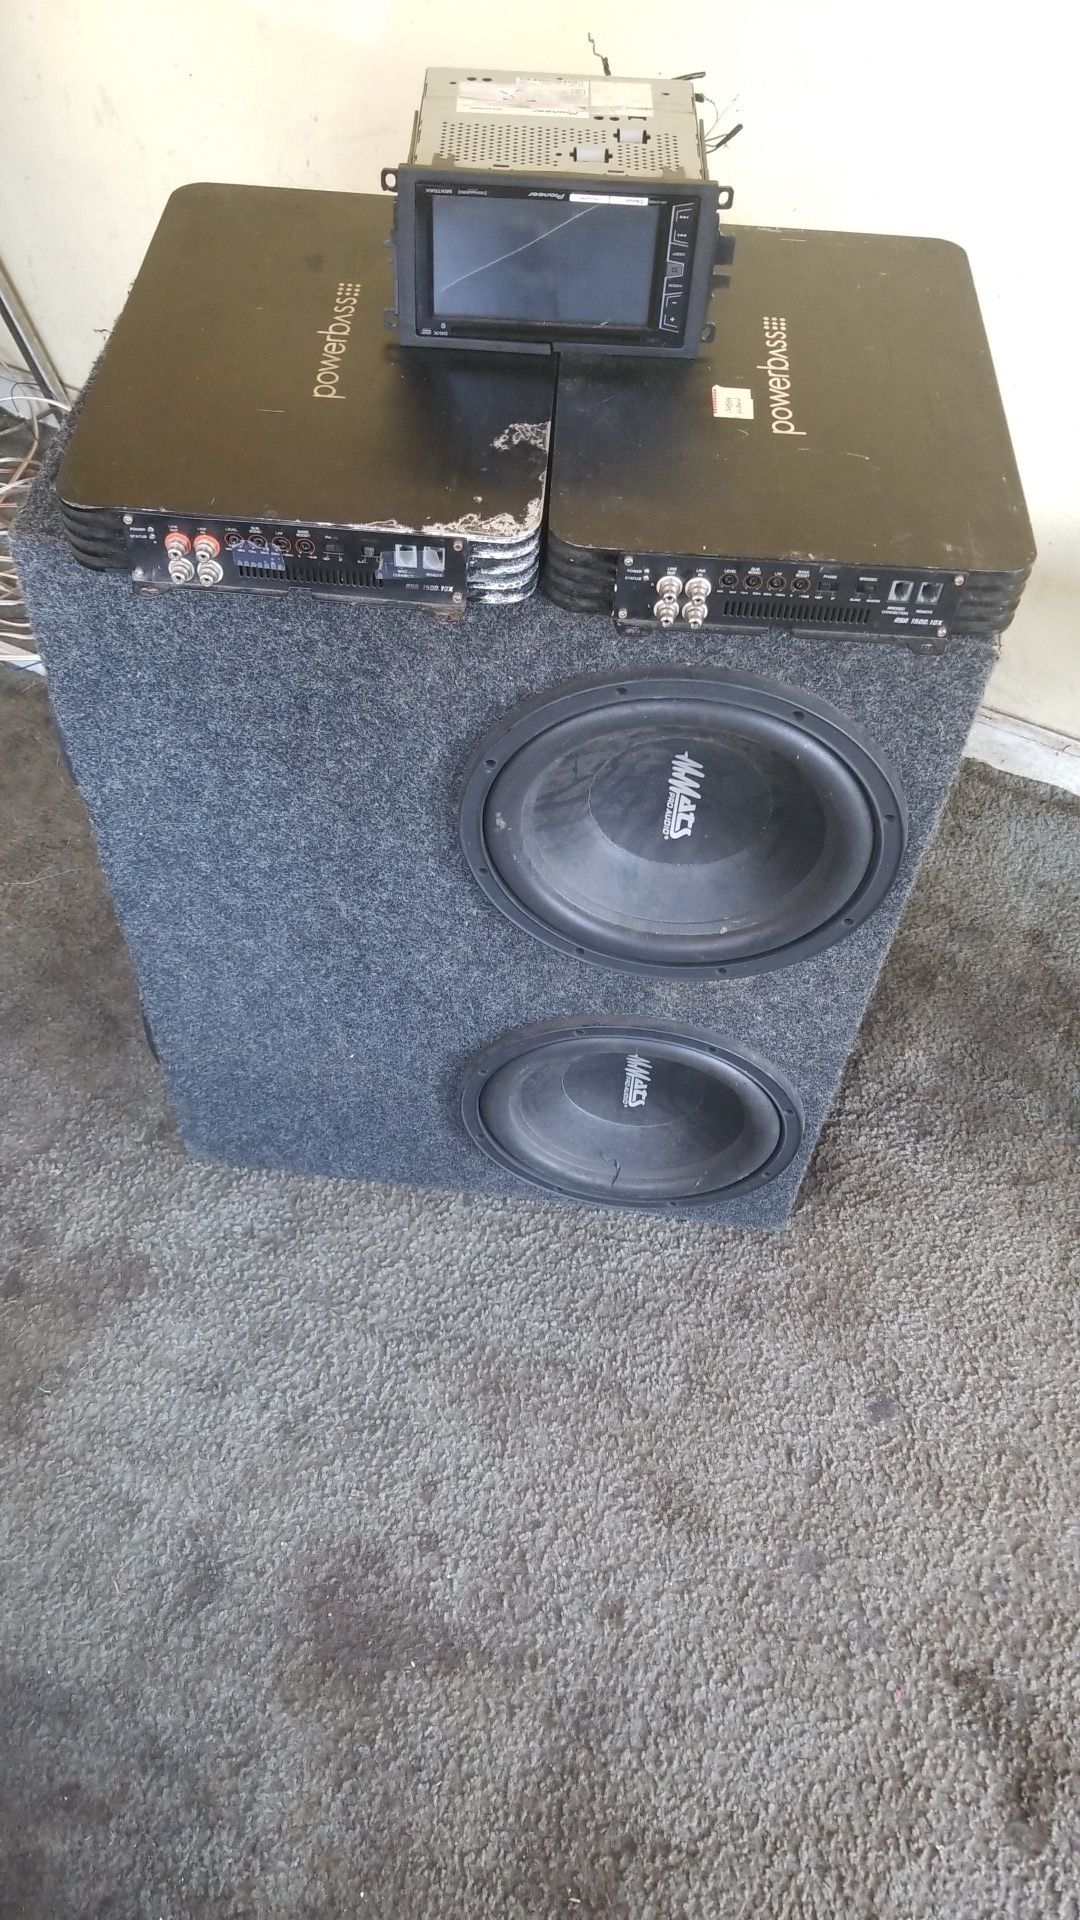 2 powerbass amps 1500 watts a piece and 4 12s mmats pro audio and TV radio double din